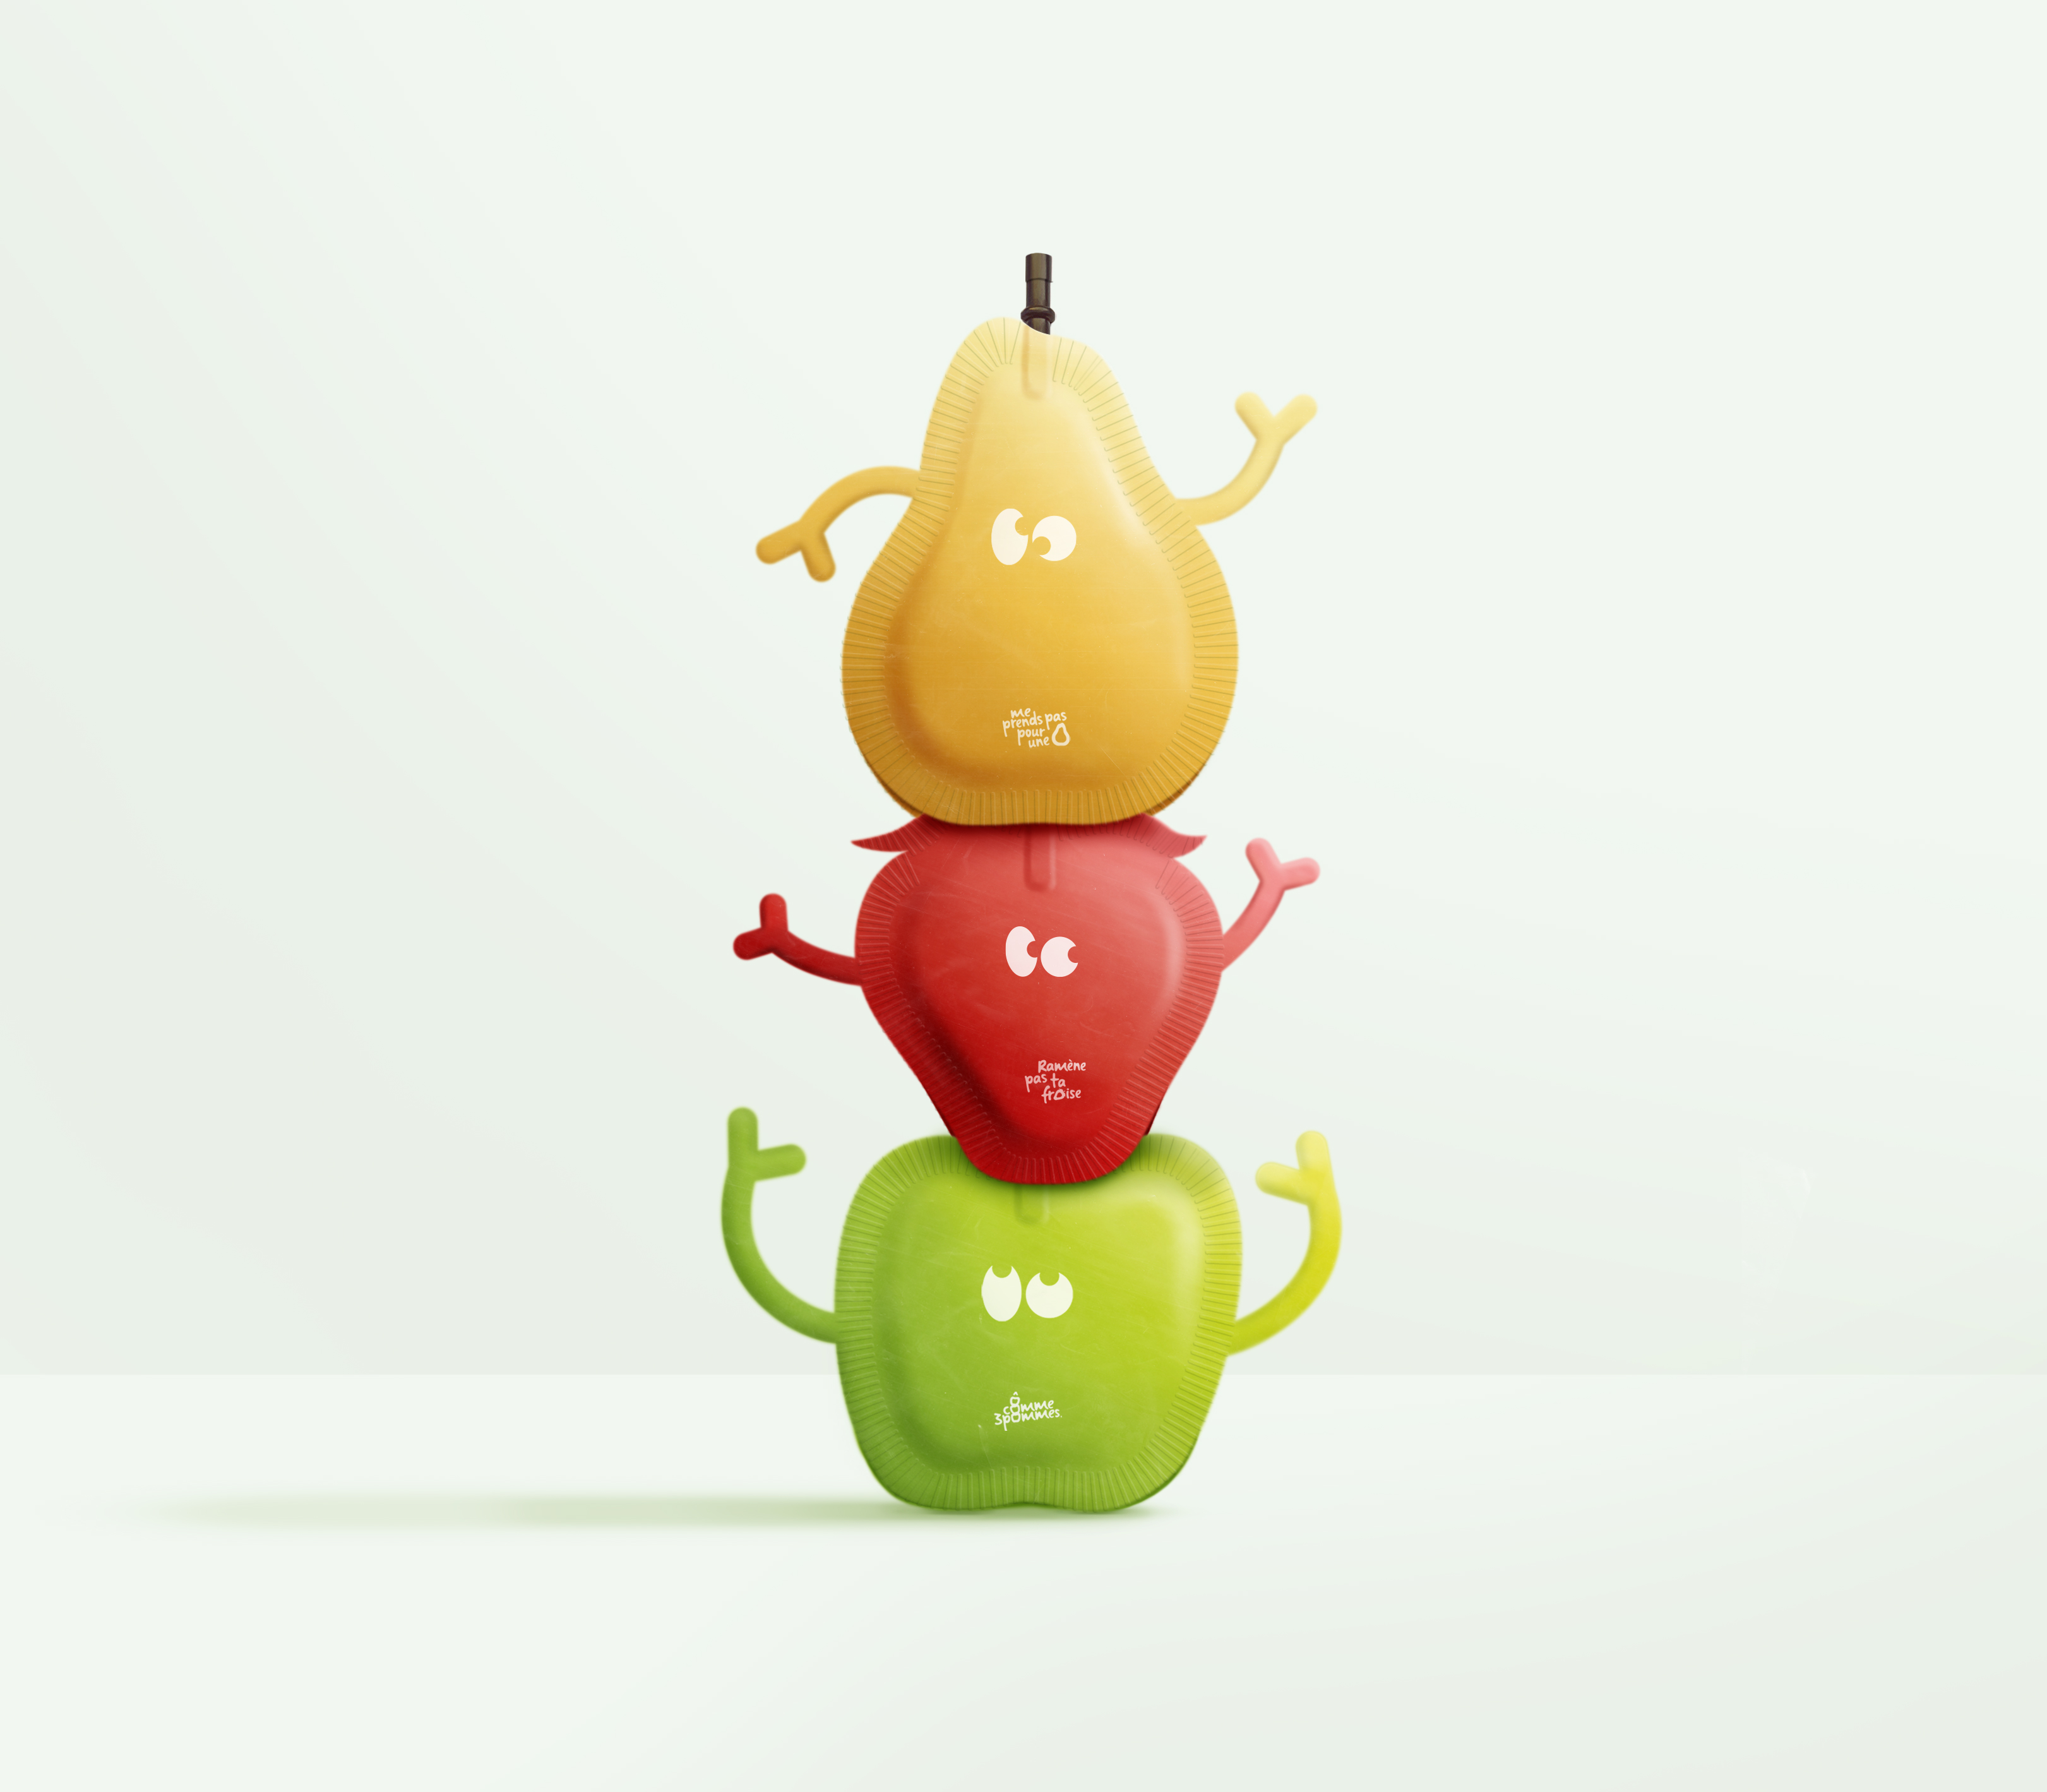 Student Concept for Ô Comme Trois Pommes, a New Brand of Compotes for Children